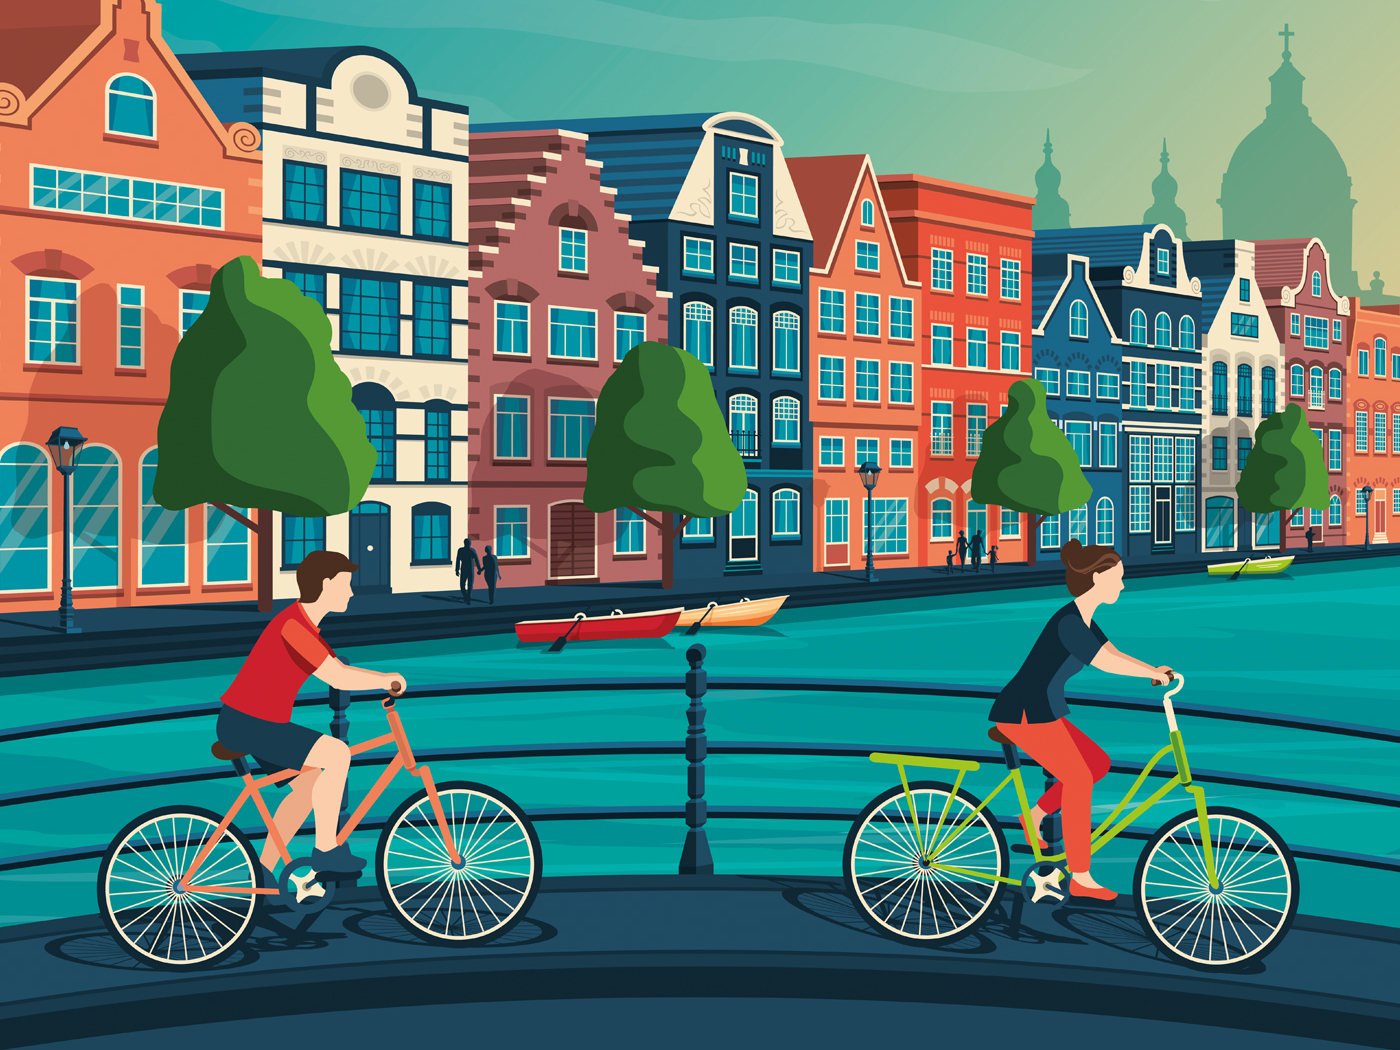 Amsterdam Netherlands Retro Travel Poster Illustration by Di Beutierio on Dribbble